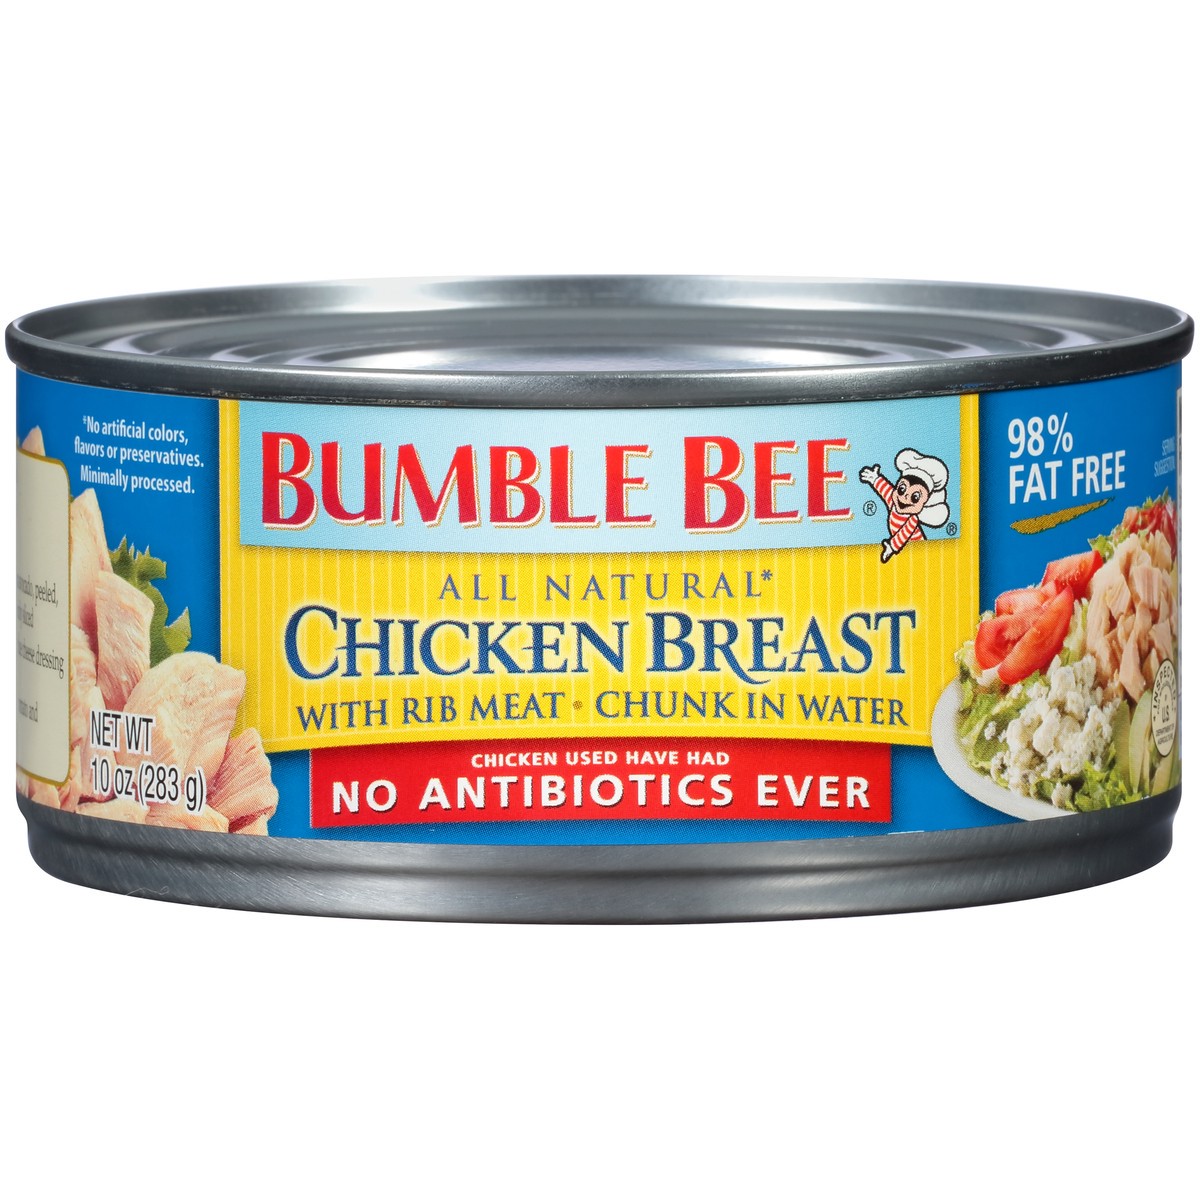 slide 1 of 11, Bumble Bee All Natural Chicken Breast with Rib Meat Chunk in Water Chicken Breas, 10 oz